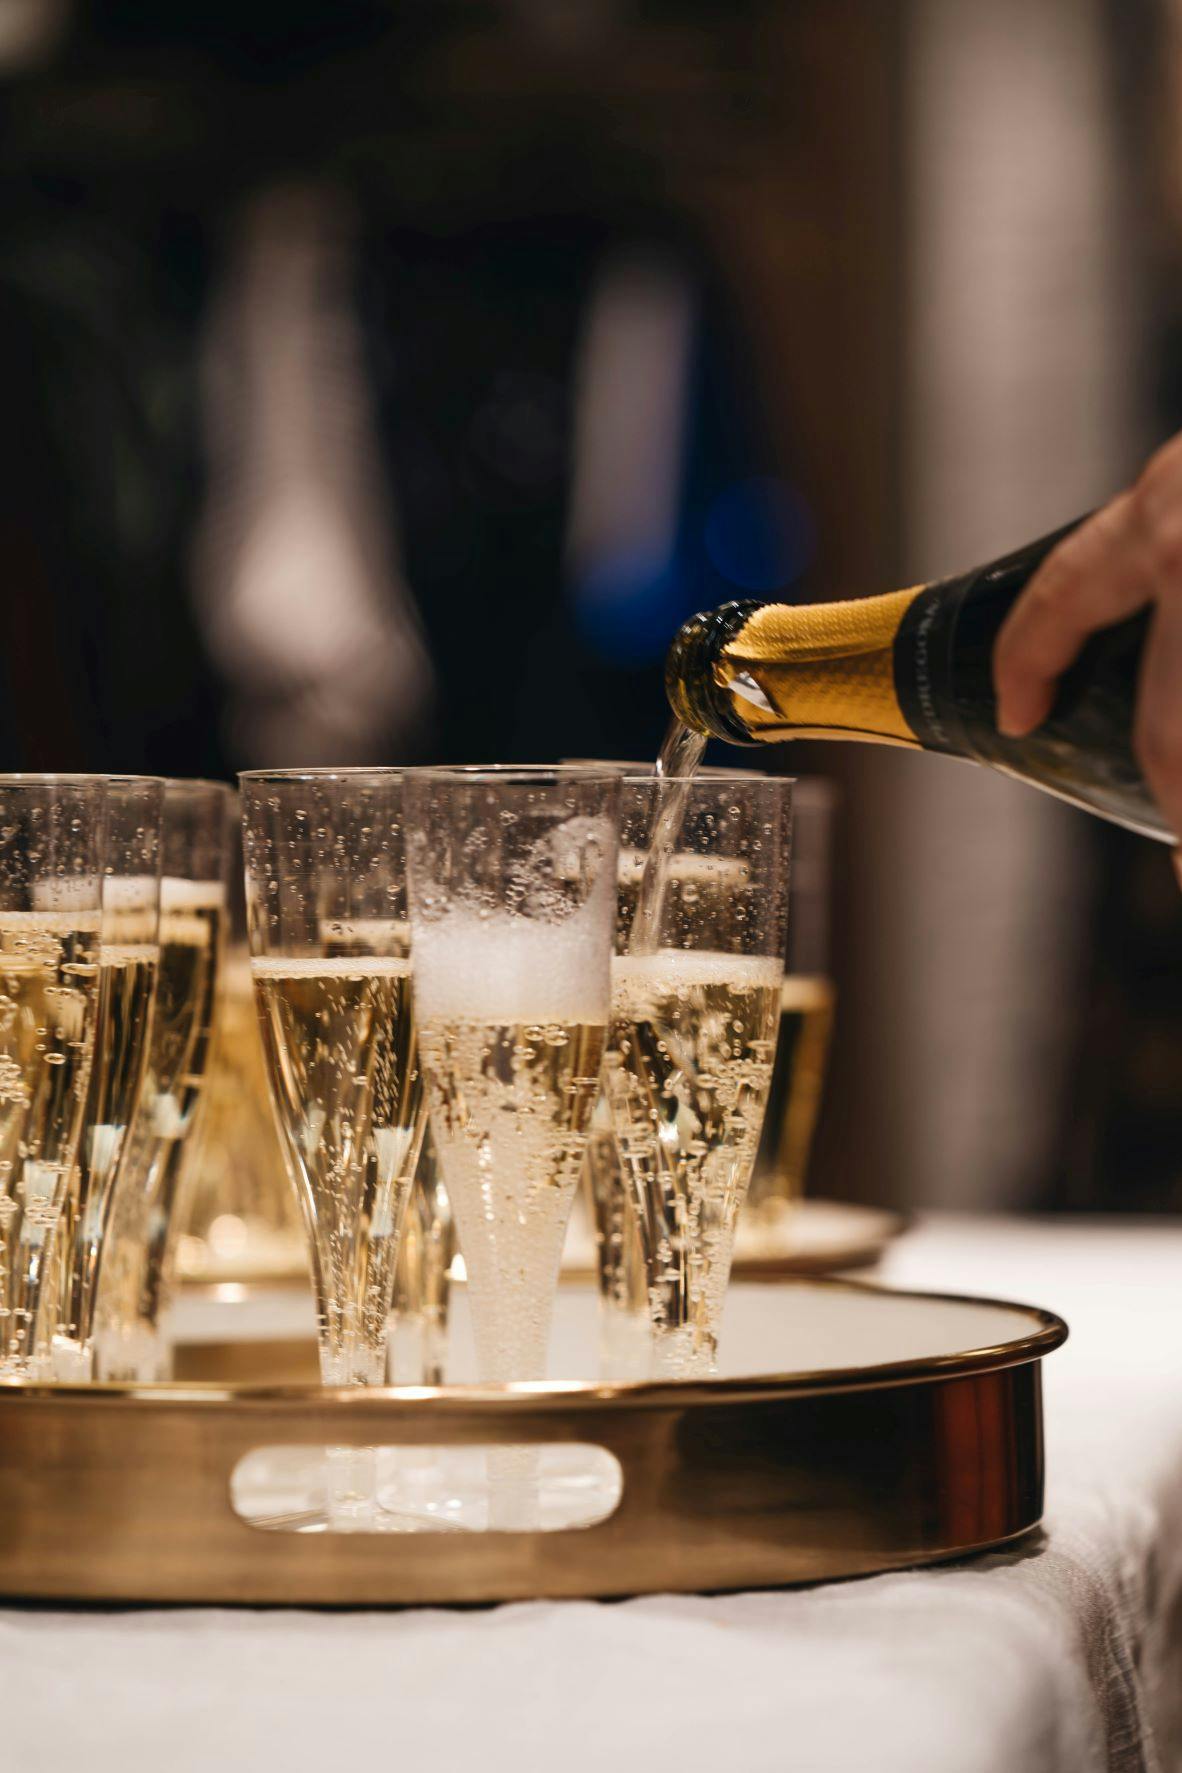 The be•at VIP Experience (Culinaire Gerechten met Champagne)